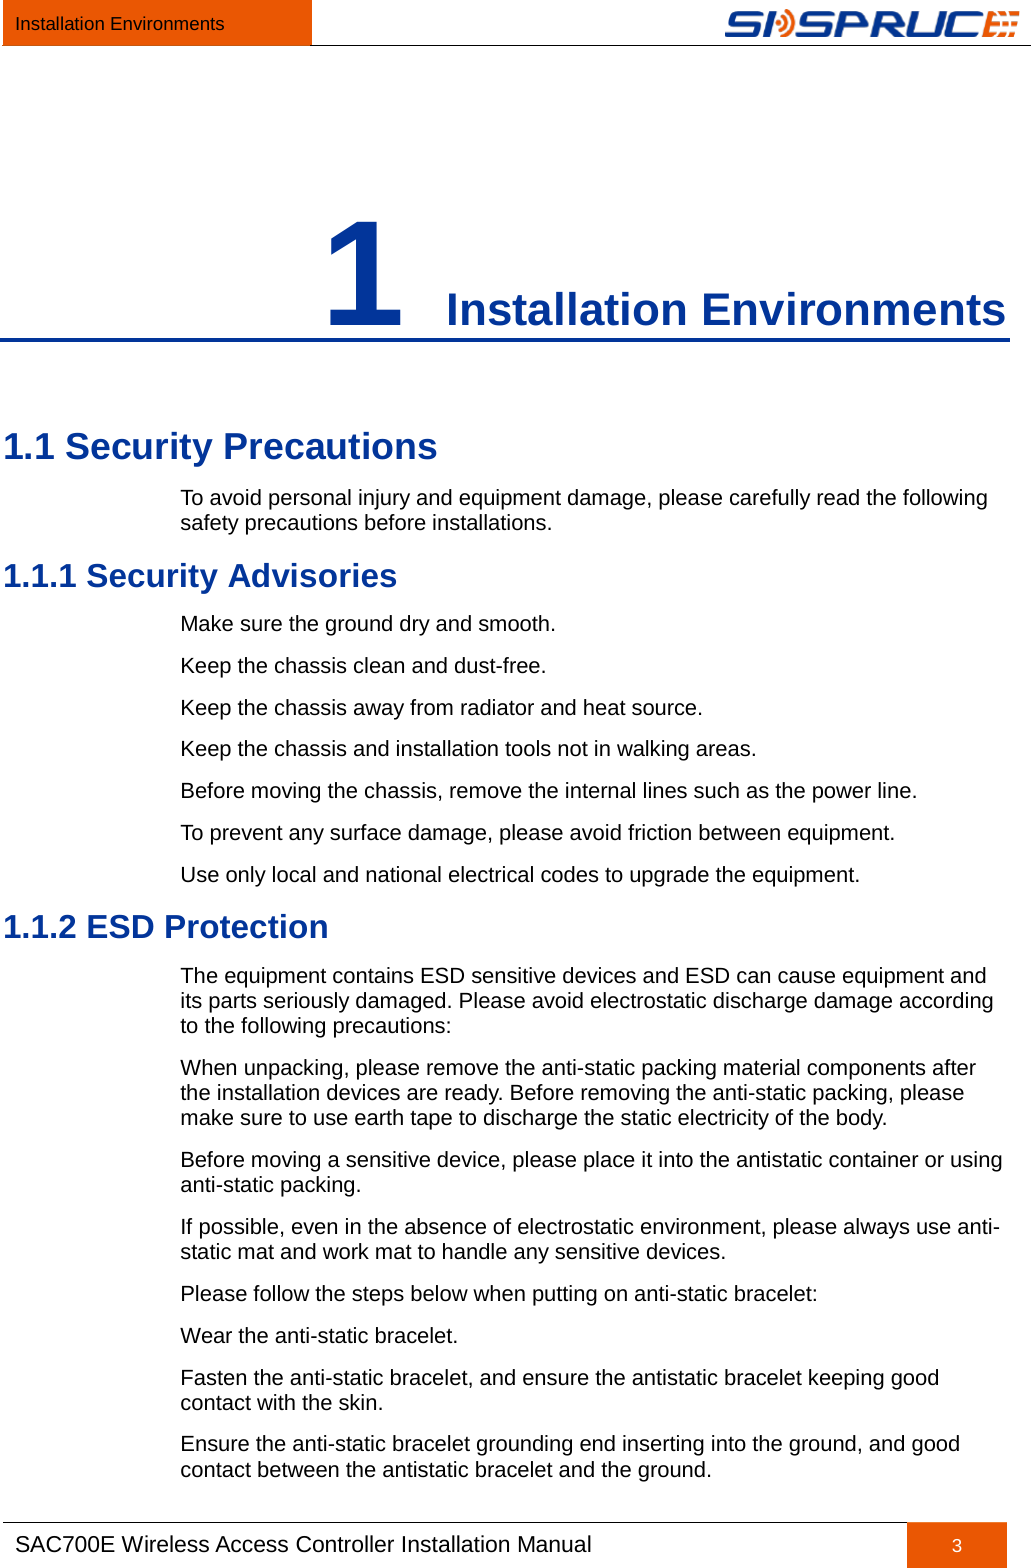 Installation Environments   SAC700E Wireless Access Controller Installation Manual 3  1 Installation Environments 1.1 Security Precautions To avoid personal injury and equipment damage, please carefully read the following safety precautions before installations. 1.1.1 Security Advisories Make sure the ground dry and smooth. Keep the chassis clean and dust-free. Keep the chassis away from radiator and heat source. Keep the chassis and installation tools not in walking areas. Before moving the chassis, remove the internal lines such as the power line. To prevent any surface damage, please avoid friction between equipment. Use only local and national electrical codes to upgrade the equipment. 1.1.2 ESD Protection The equipment contains ESD sensitive devices and ESD can cause equipment and its parts seriously damaged. Please avoid electrostatic discharge damage according to the following precautions: When unpacking, please remove the anti-static packing material components after the installation devices are ready. Before removing the anti-static packing, please make sure to use earth tape to discharge the static electricity of the body. Before moving a sensitive device, please place it into the antistatic container or using anti-static packing. If possible, even in the absence of electrostatic environment, please always use anti-static mat and work mat to handle any sensitive devices. Please follow the steps below when putting on anti-static bracelet: Wear the anti-static bracelet. Fasten the anti-static bracelet, and ensure the antistatic bracelet keeping good contact with the skin. Ensure the anti-static bracelet grounding end inserting into the ground, and good contact between the antistatic bracelet and the ground. 